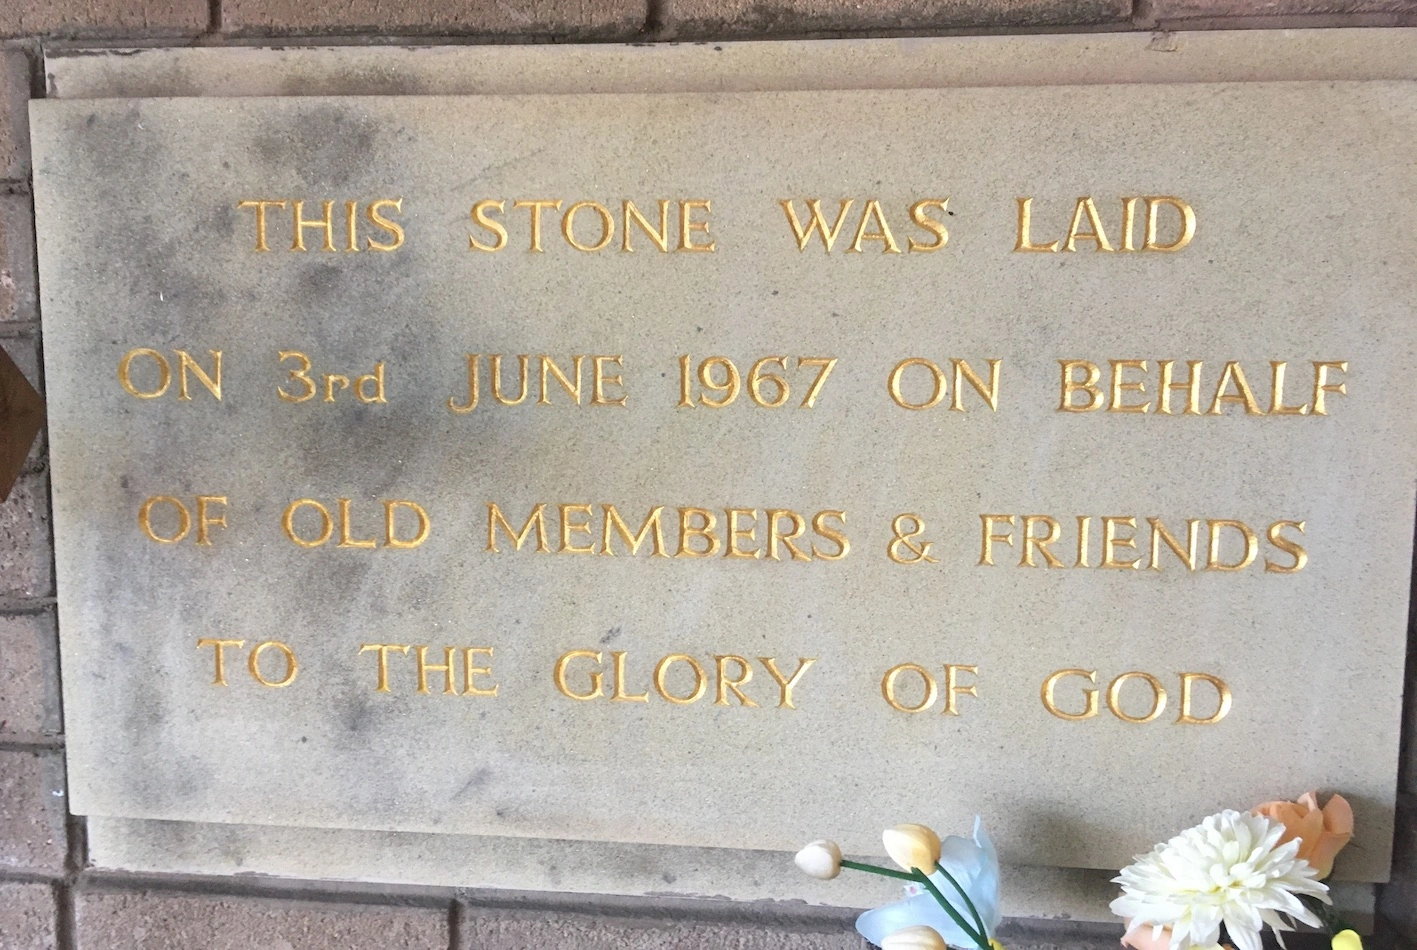 Grey stone with gold lettered inscription laid on behalf of old members and friends commemorating the 1967 building of Lindale Methodist Church